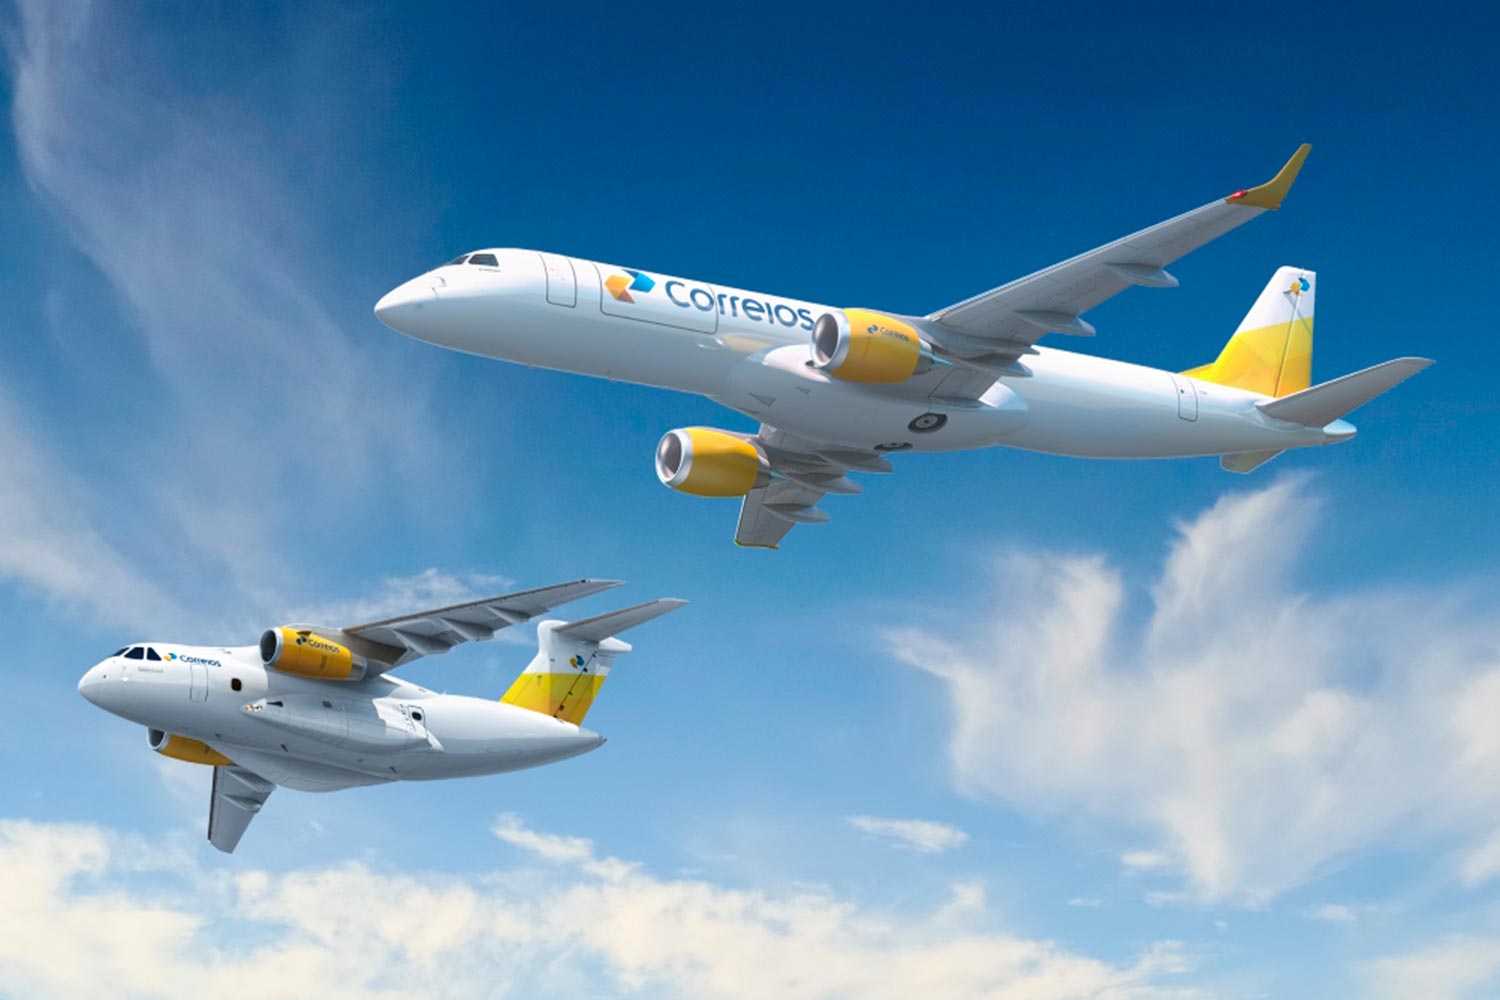 The C-390 and the E190F with Correios livery